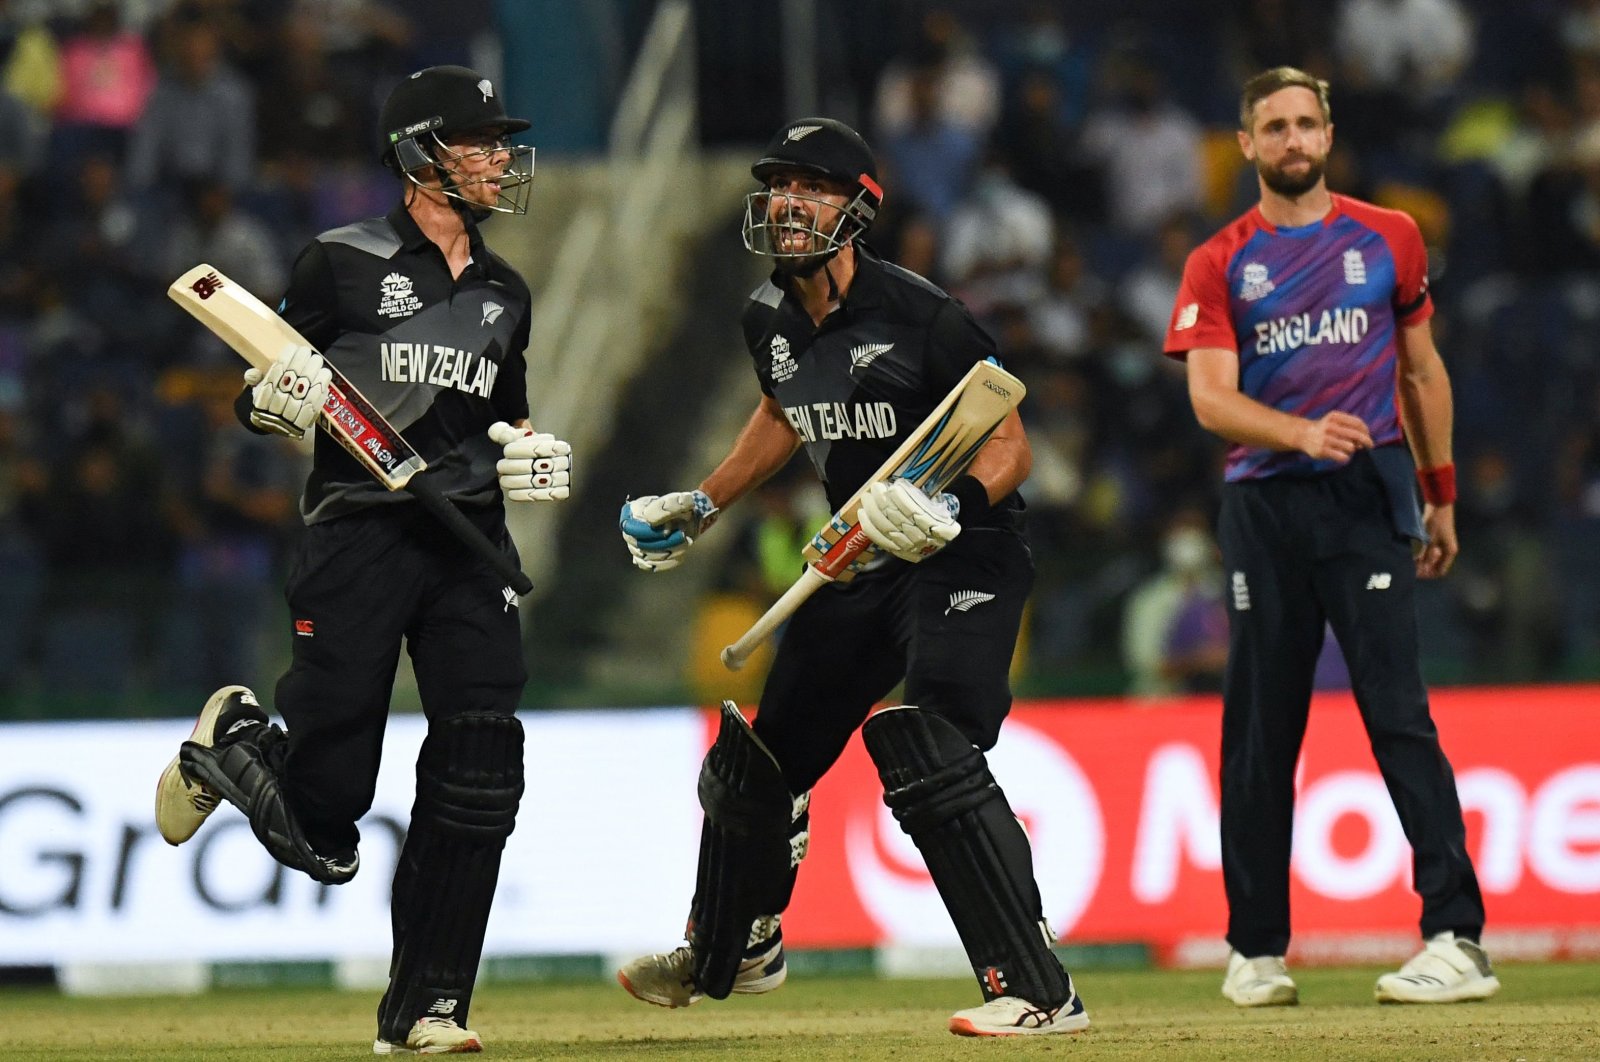 New Zealand's Daryl Mitchell (C) reacts after New Zealand's victory at the end of the ICC men's T20 World Cup semifinal against England in Abu Dhabi, Nov. 10, 2021. (AFP Photo)